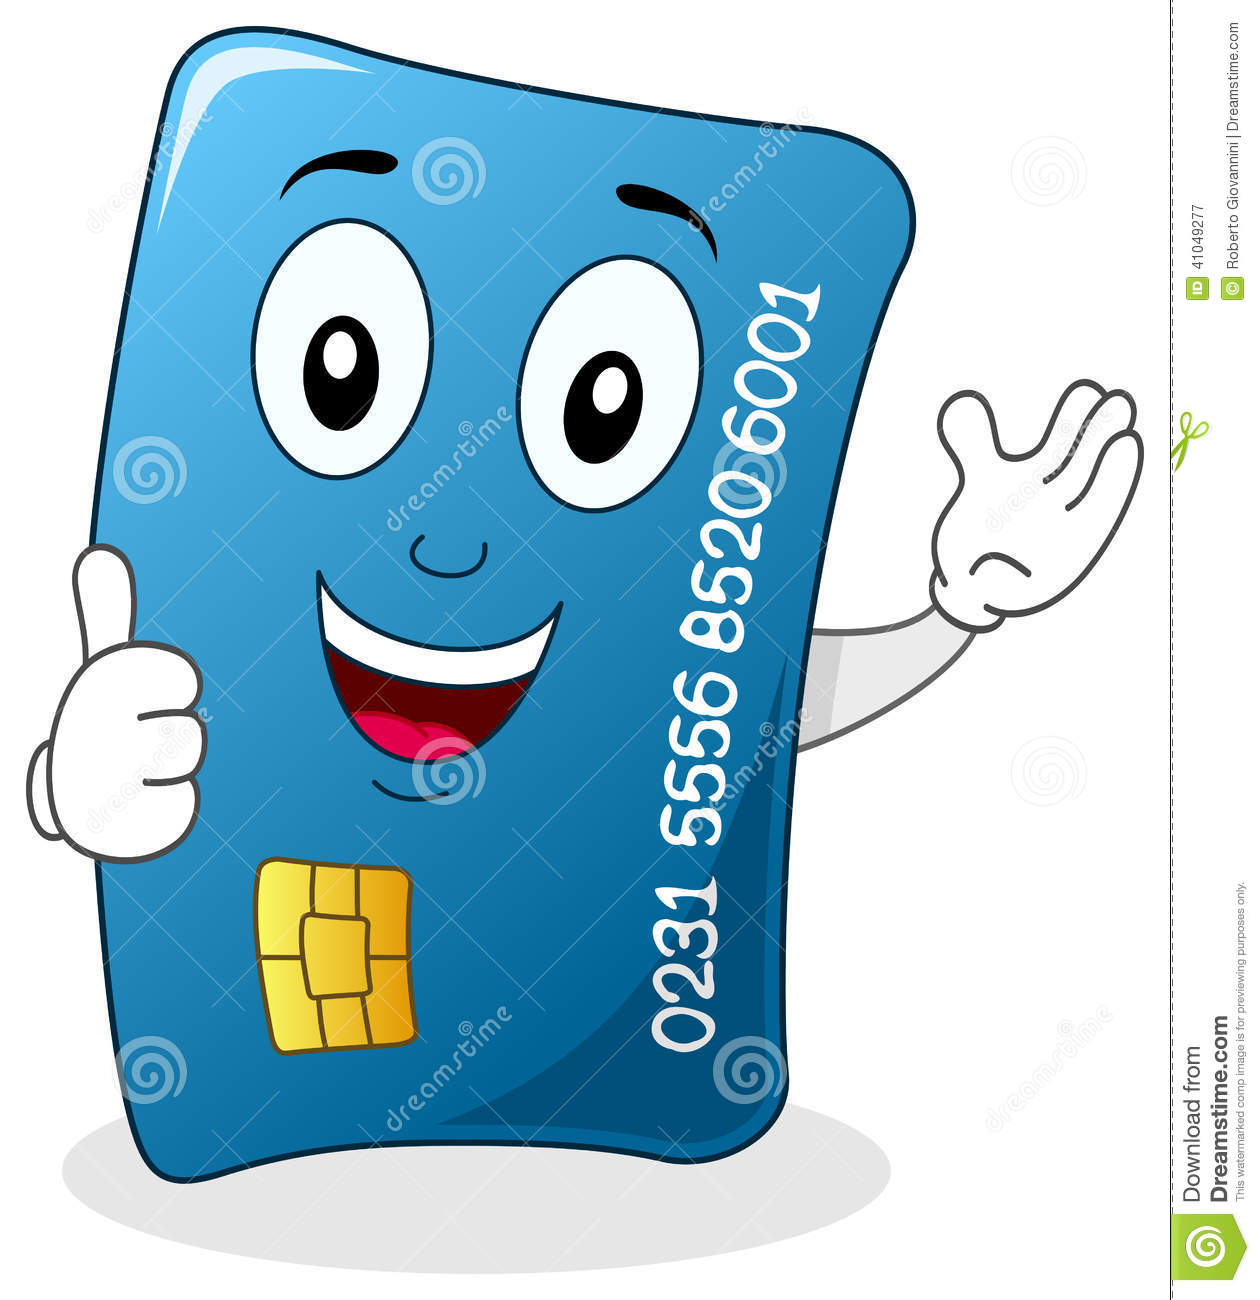 Credit Card With Thumbs Up Character Stock Vector   Image  41049277